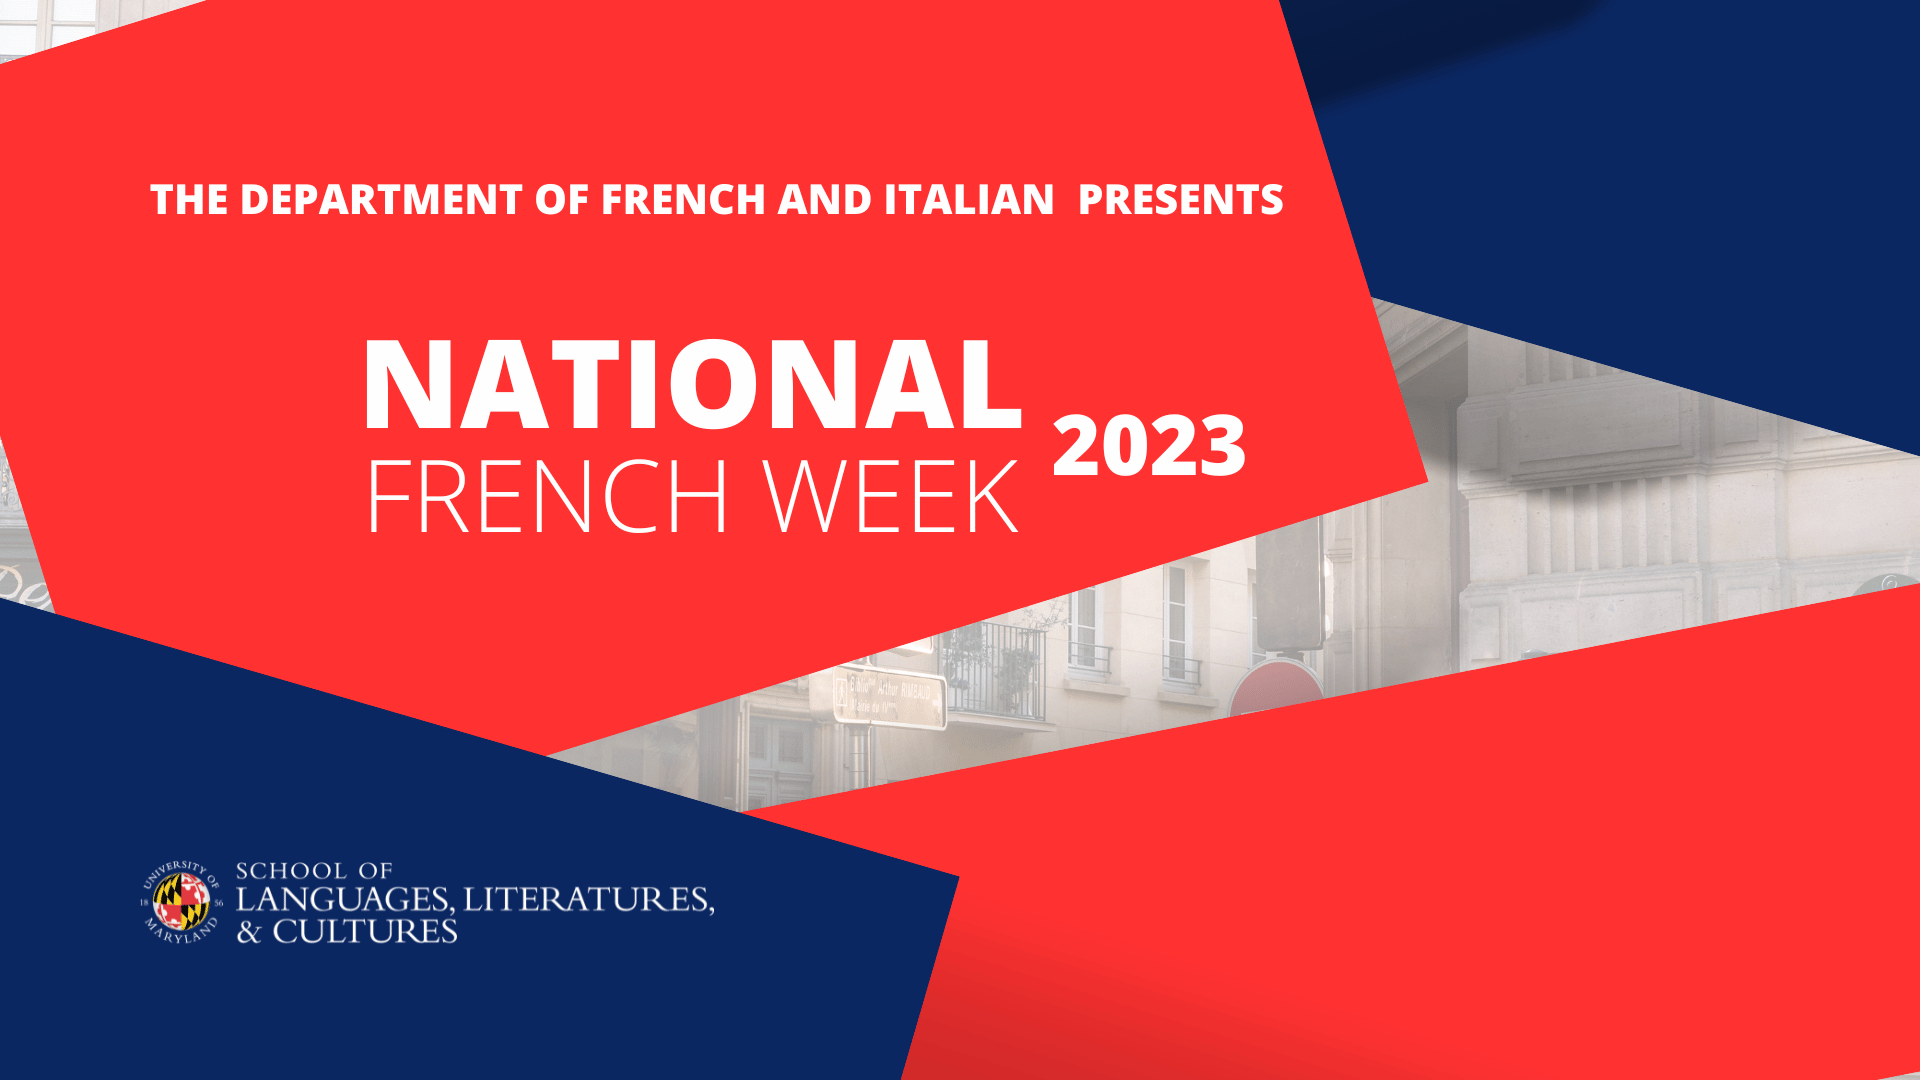 inset image for national french week 2023